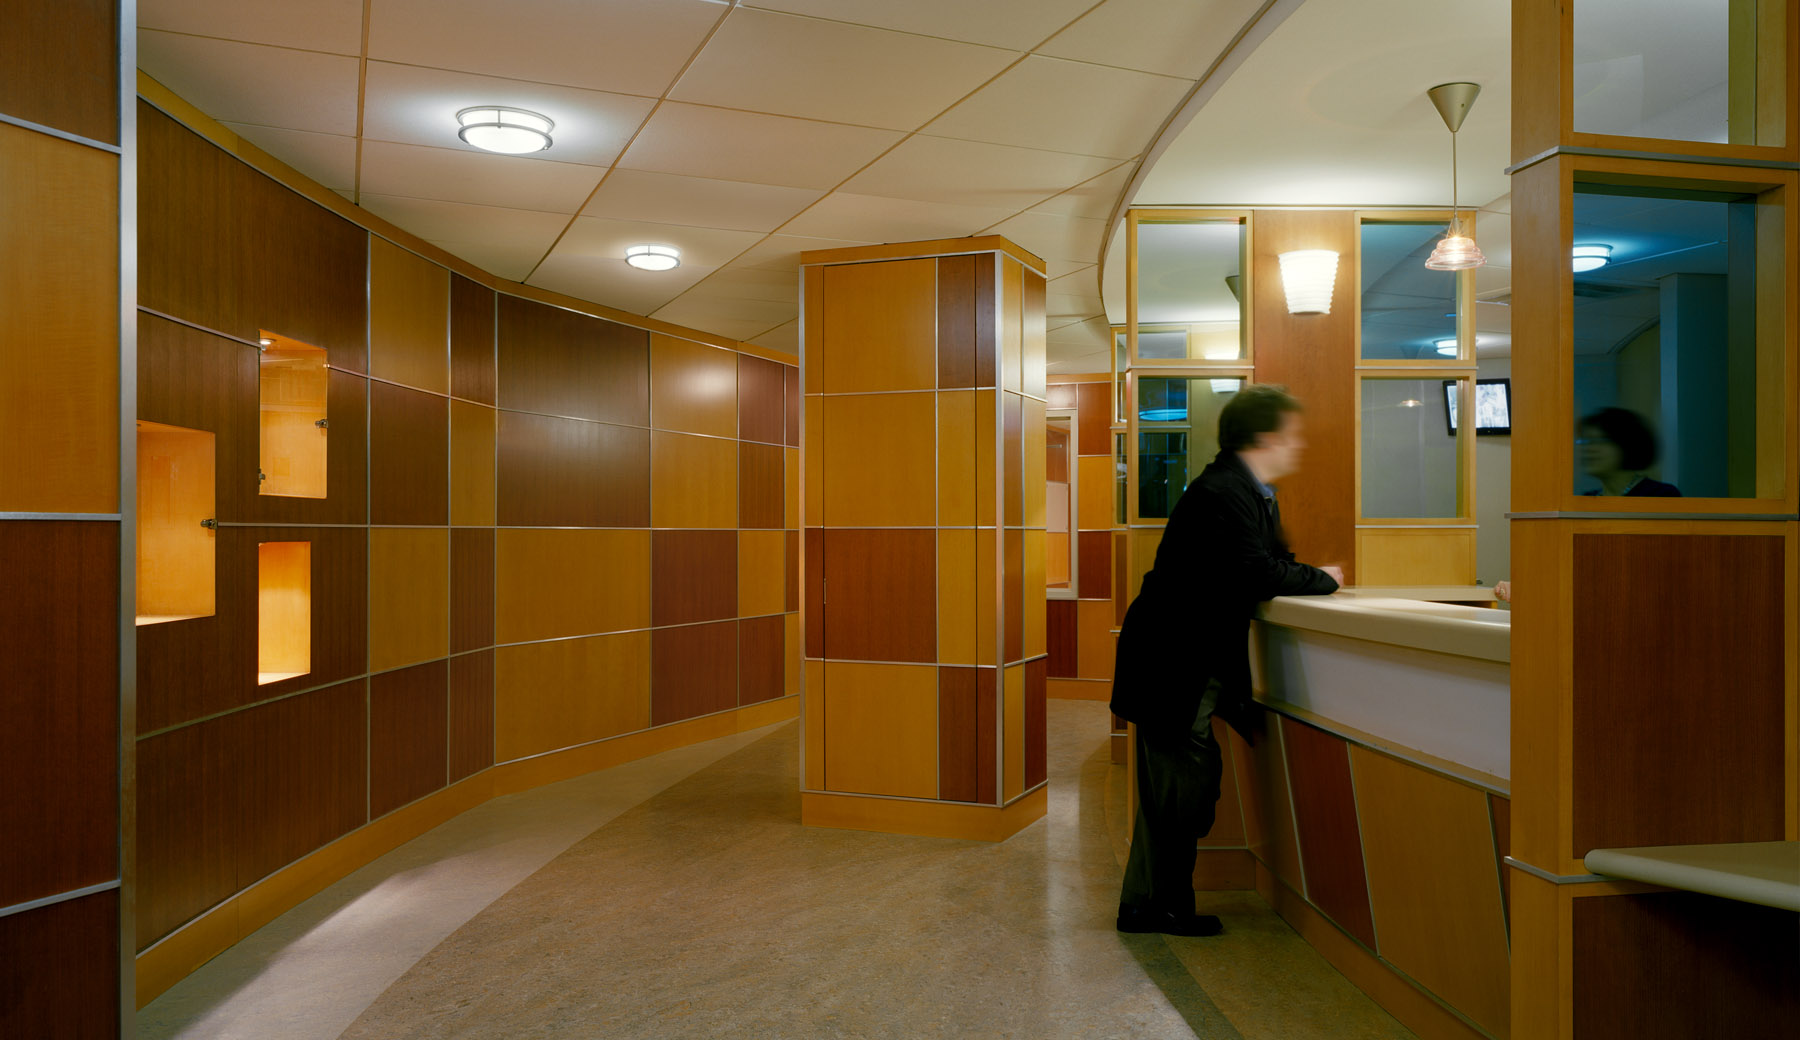 Lothrop Associates designed the The New York Eye and Ear Infirmary Ear Institute with more than 30 clinical areas.  The Institute provides services for children’s hearing and speech.  The patient check in is shown above.